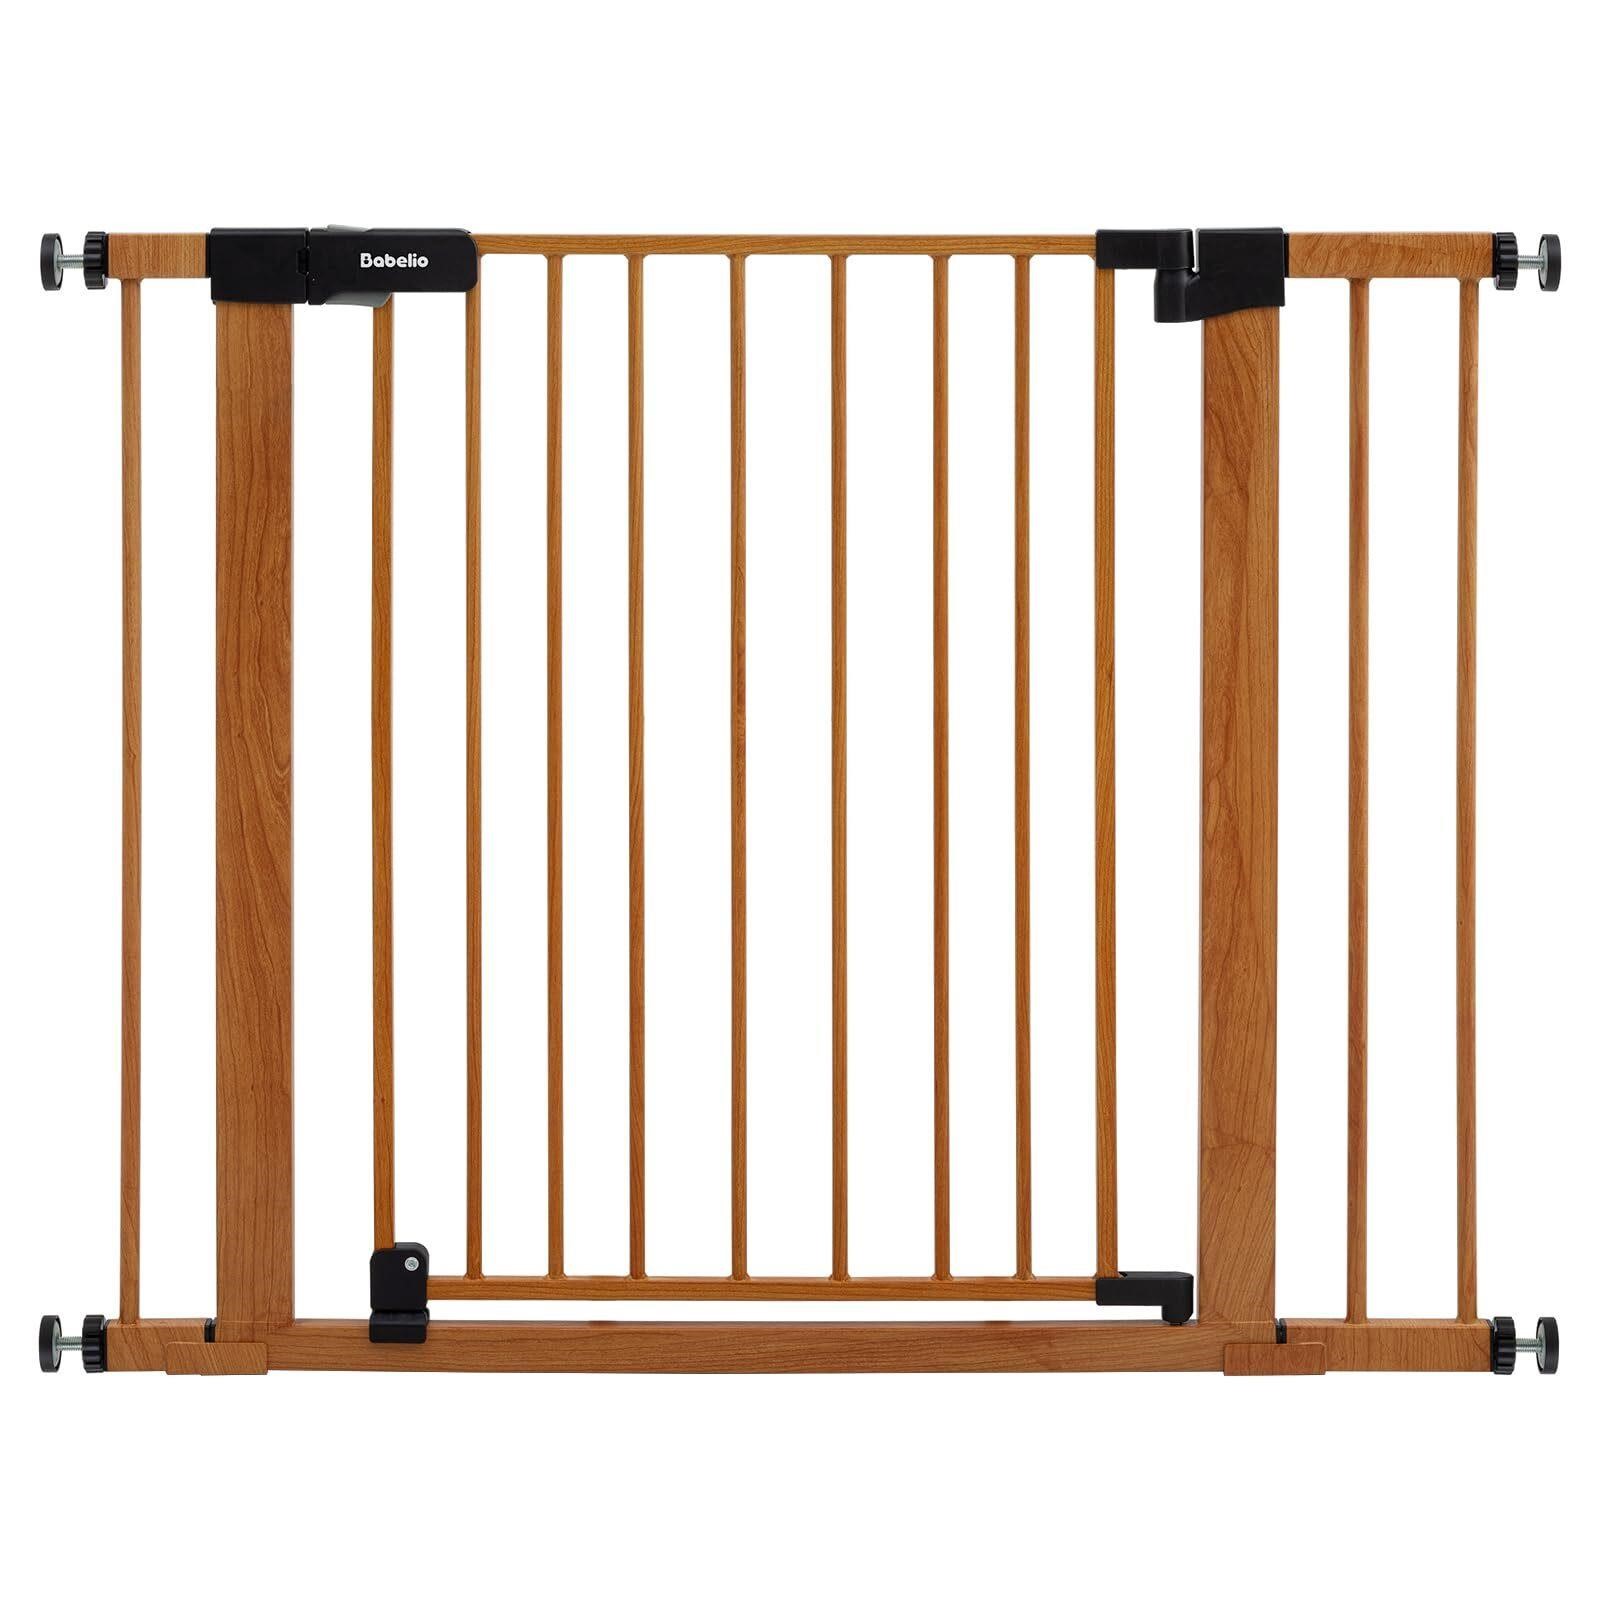 BABELIO 29-40" Metal Baby Gate with Wood Pattern,